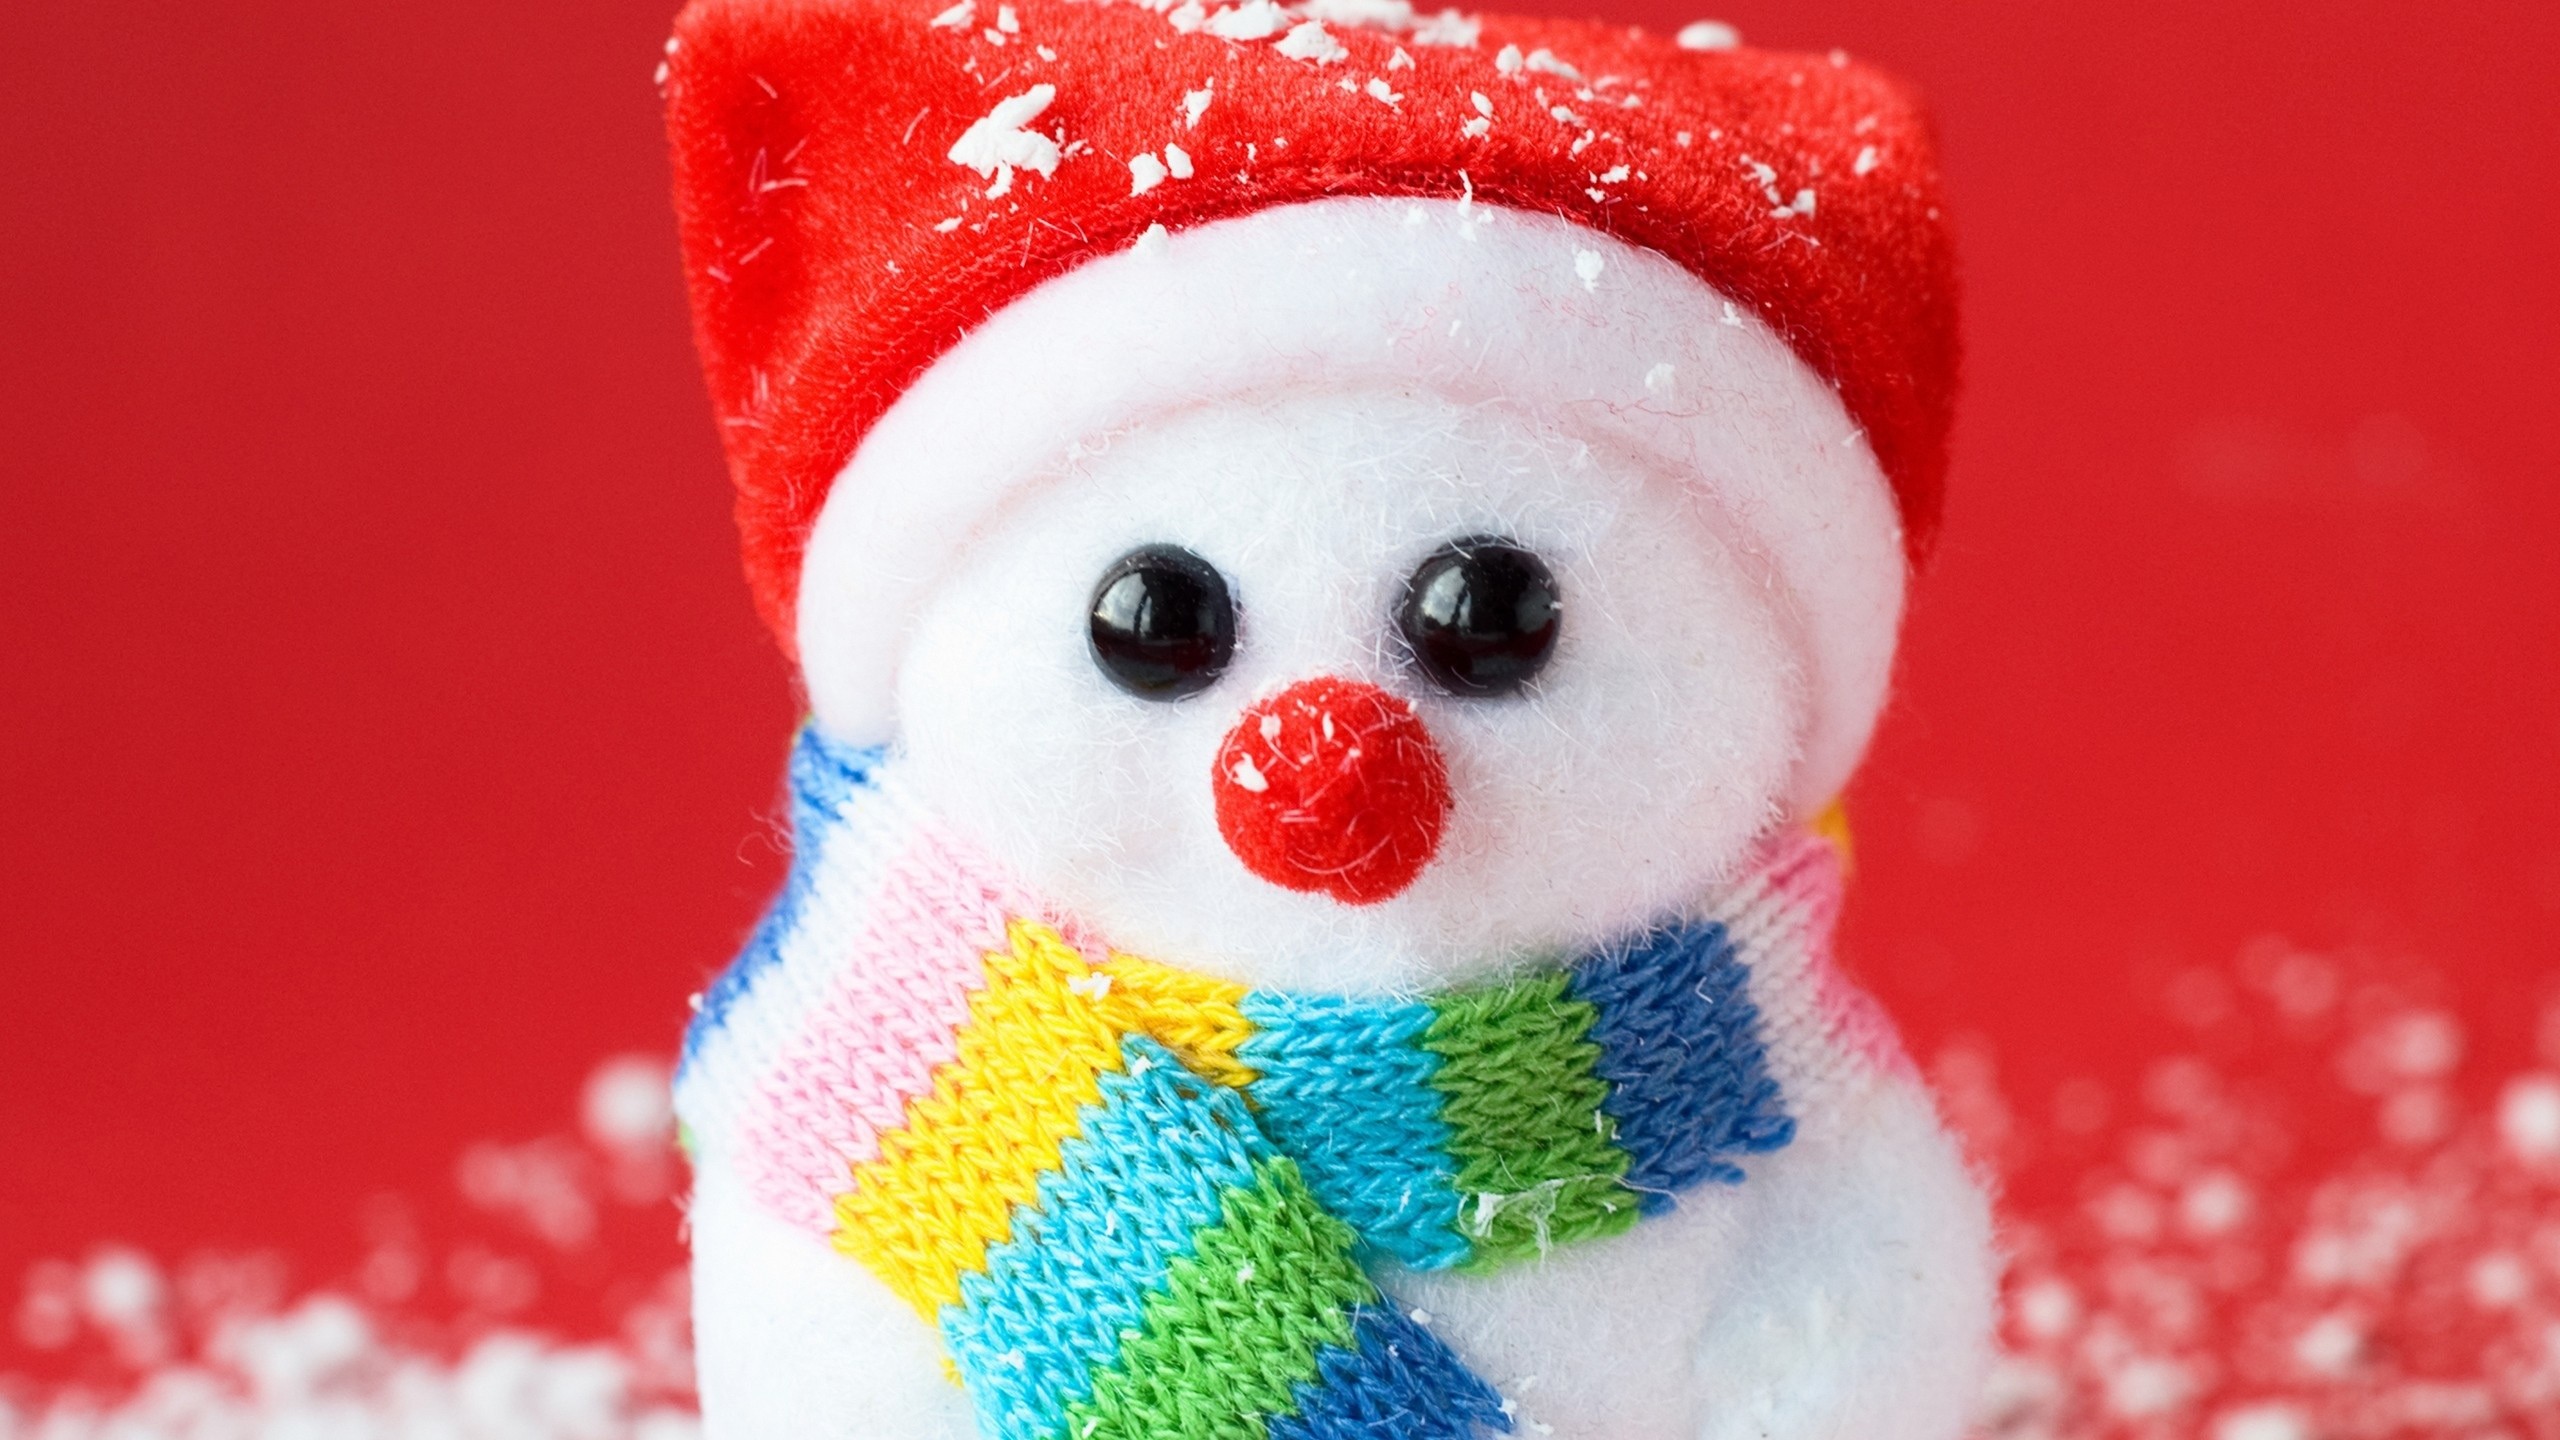 2560x1440  Snowman Christmas Ornament. How to set wallpaper on your desktop?  Click the download link from above and set the wallpaper on the desktop  from ...